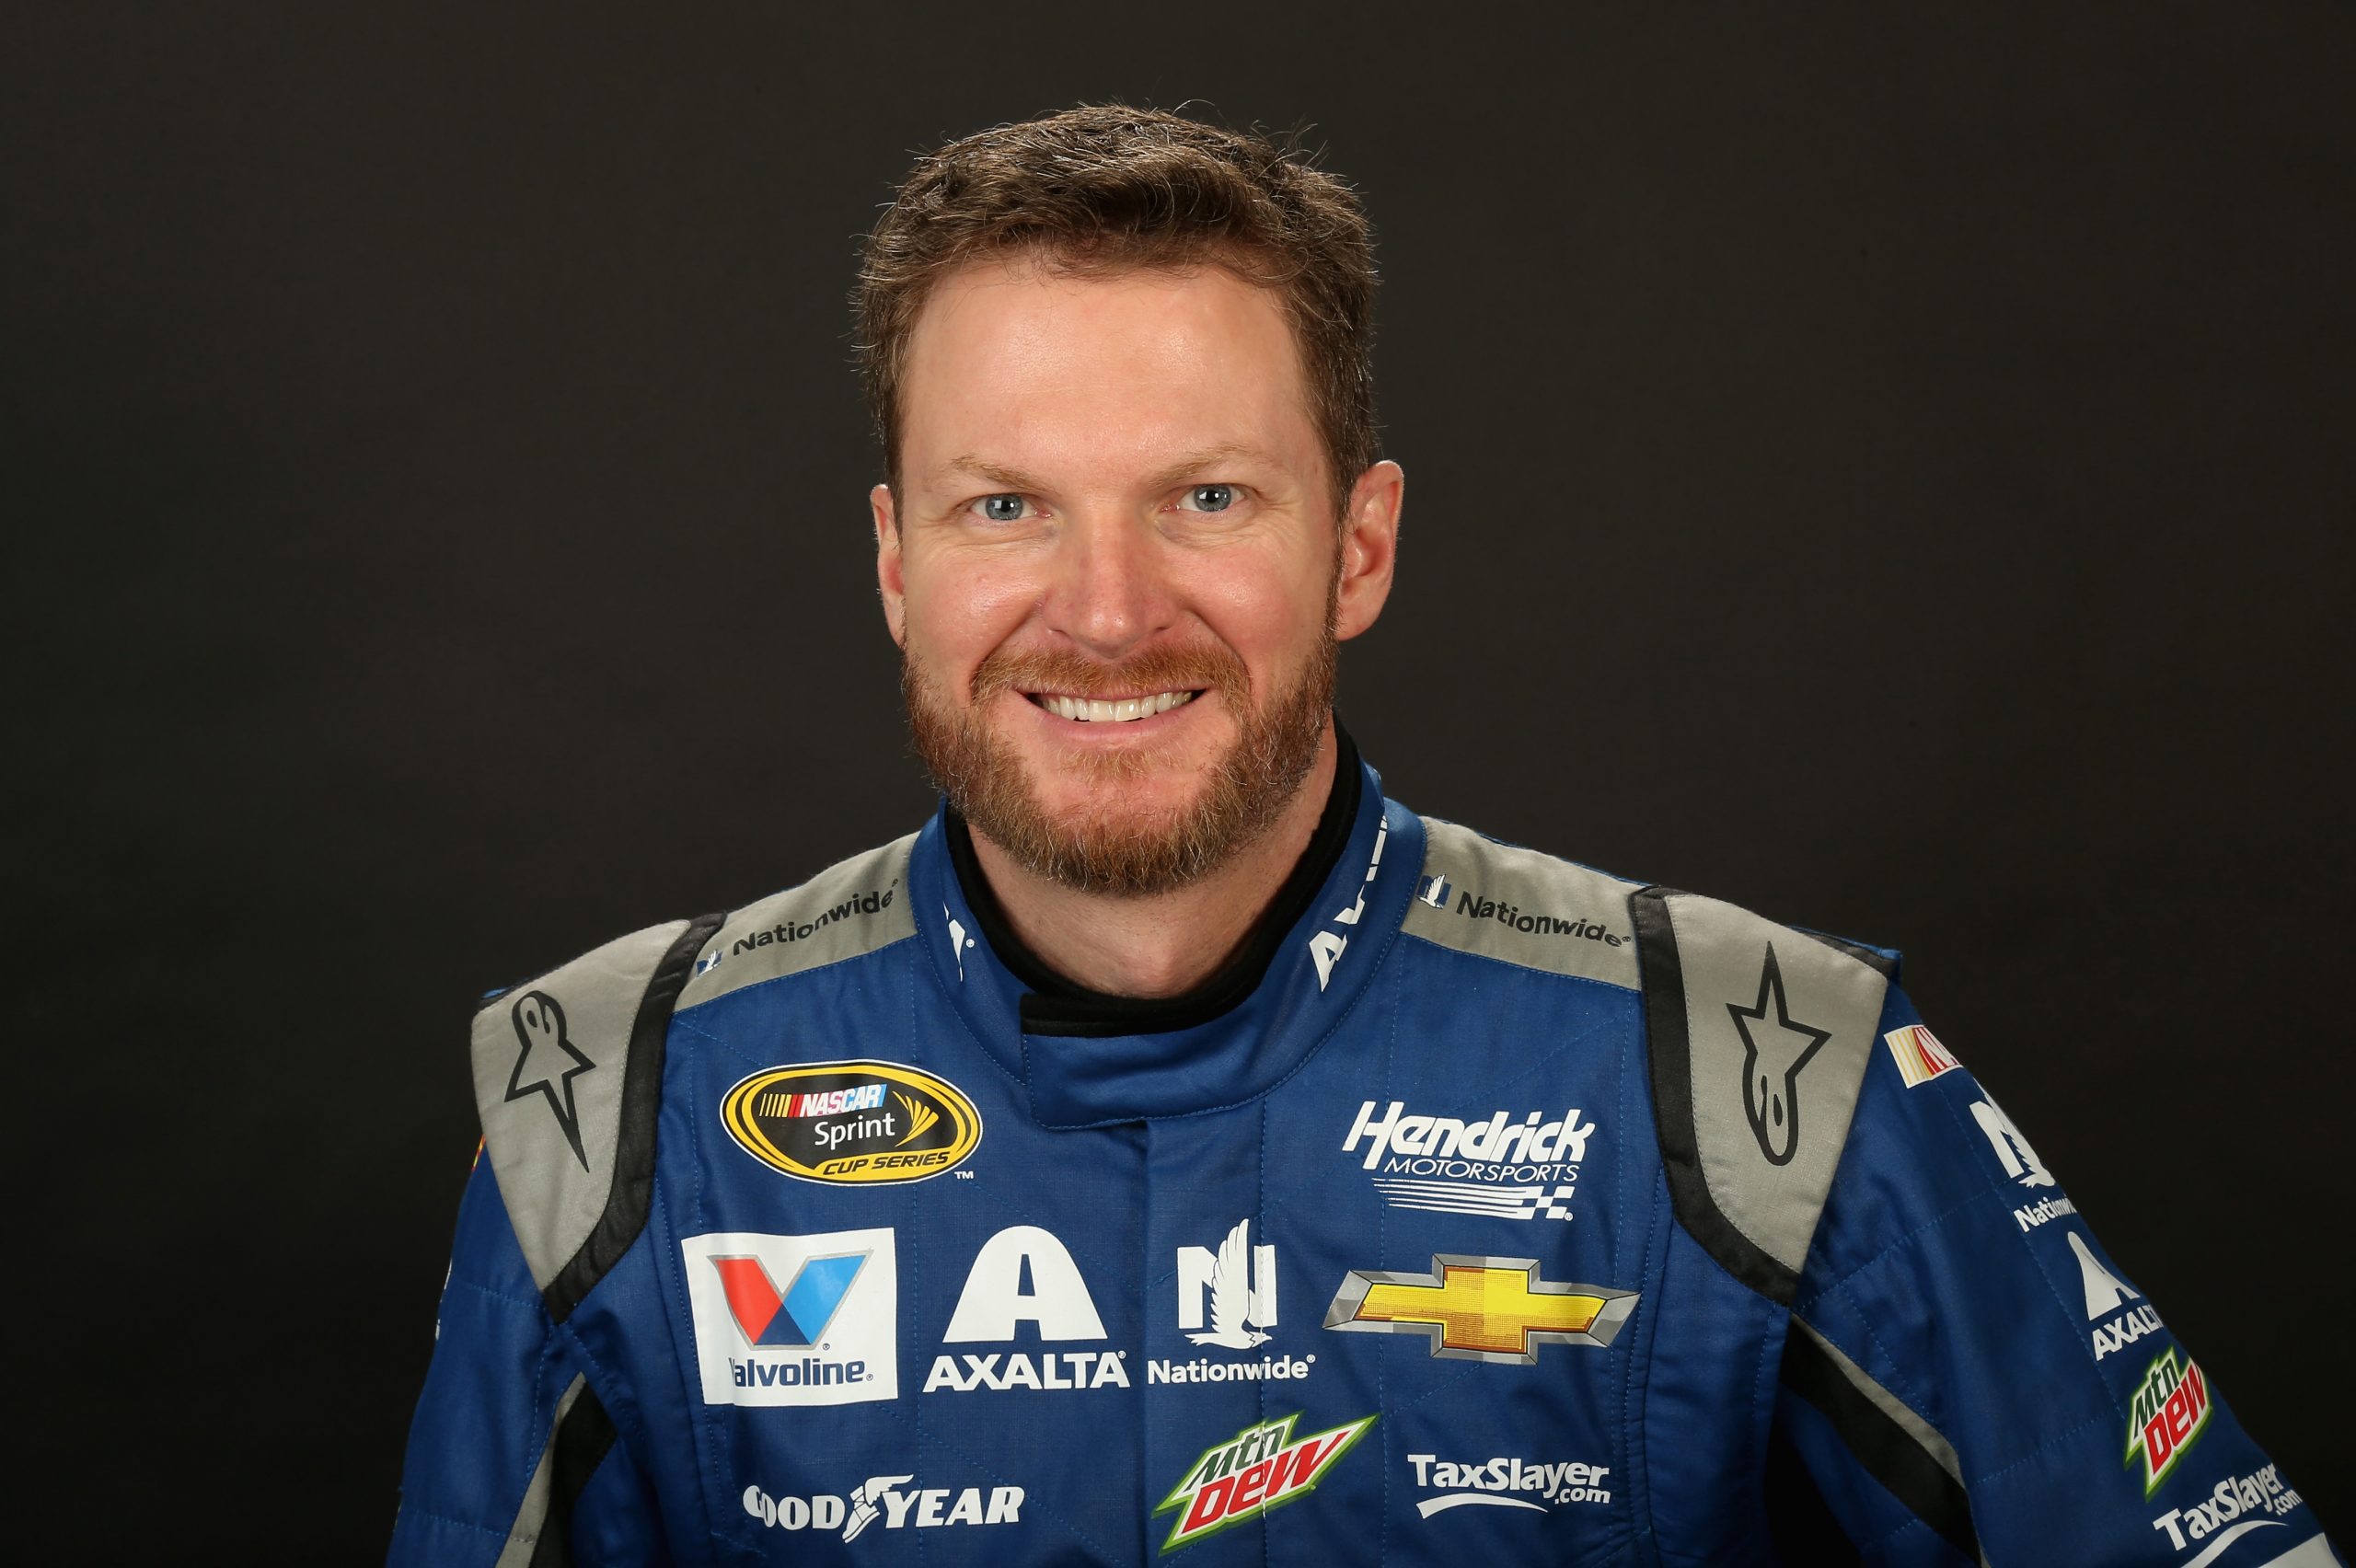 Is Dale Earnhardt Jr. worthy of the NASCAR Hall of Fame?